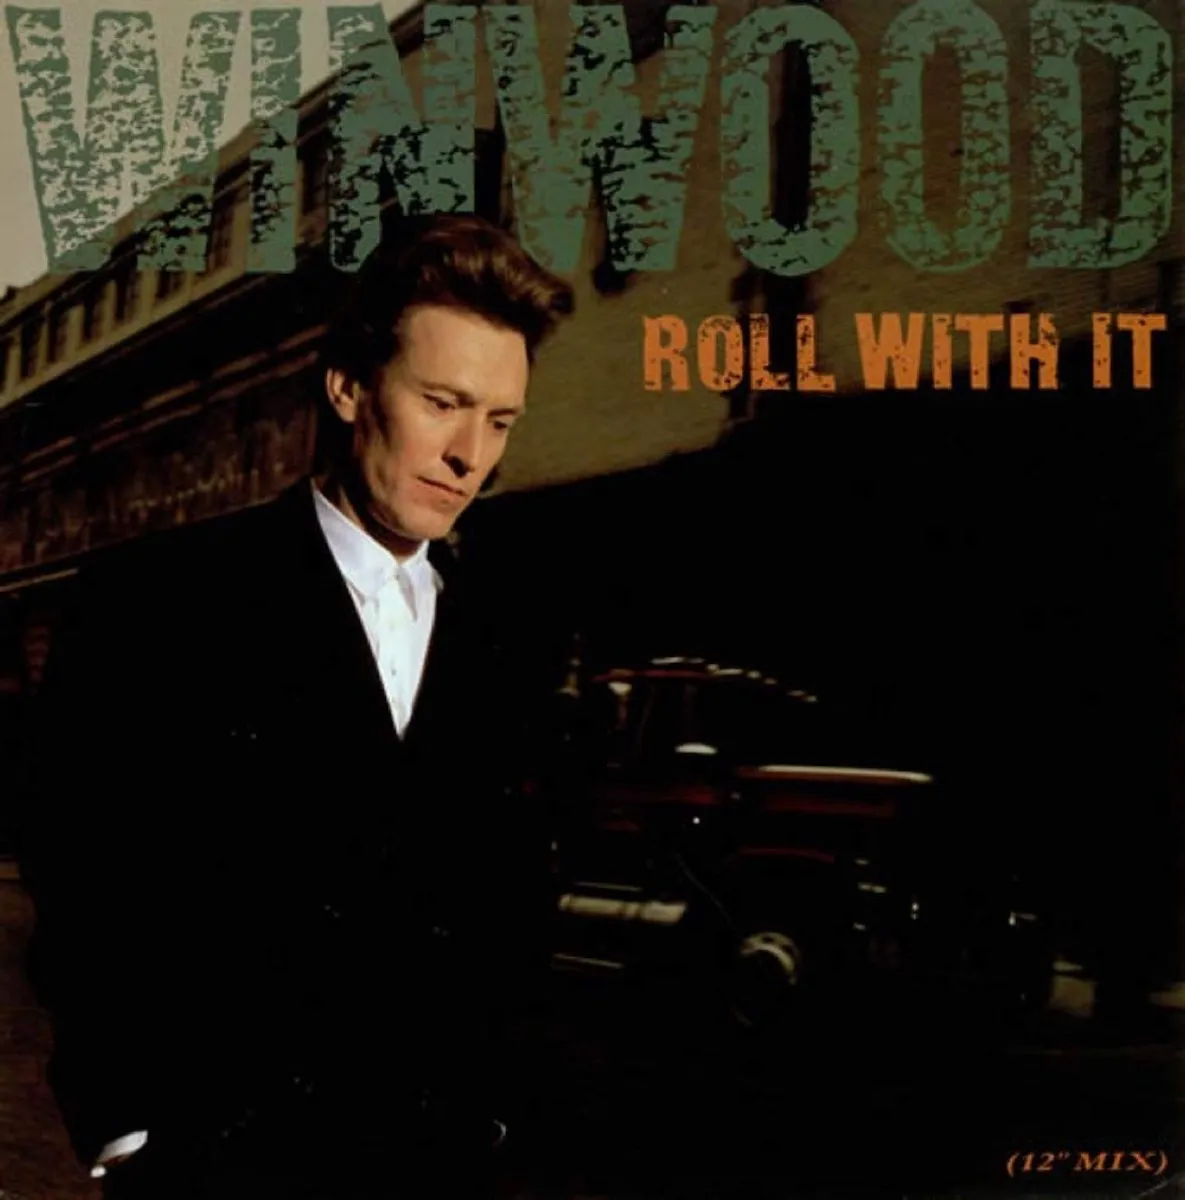 Steve Winwood "Roll With It" single cover